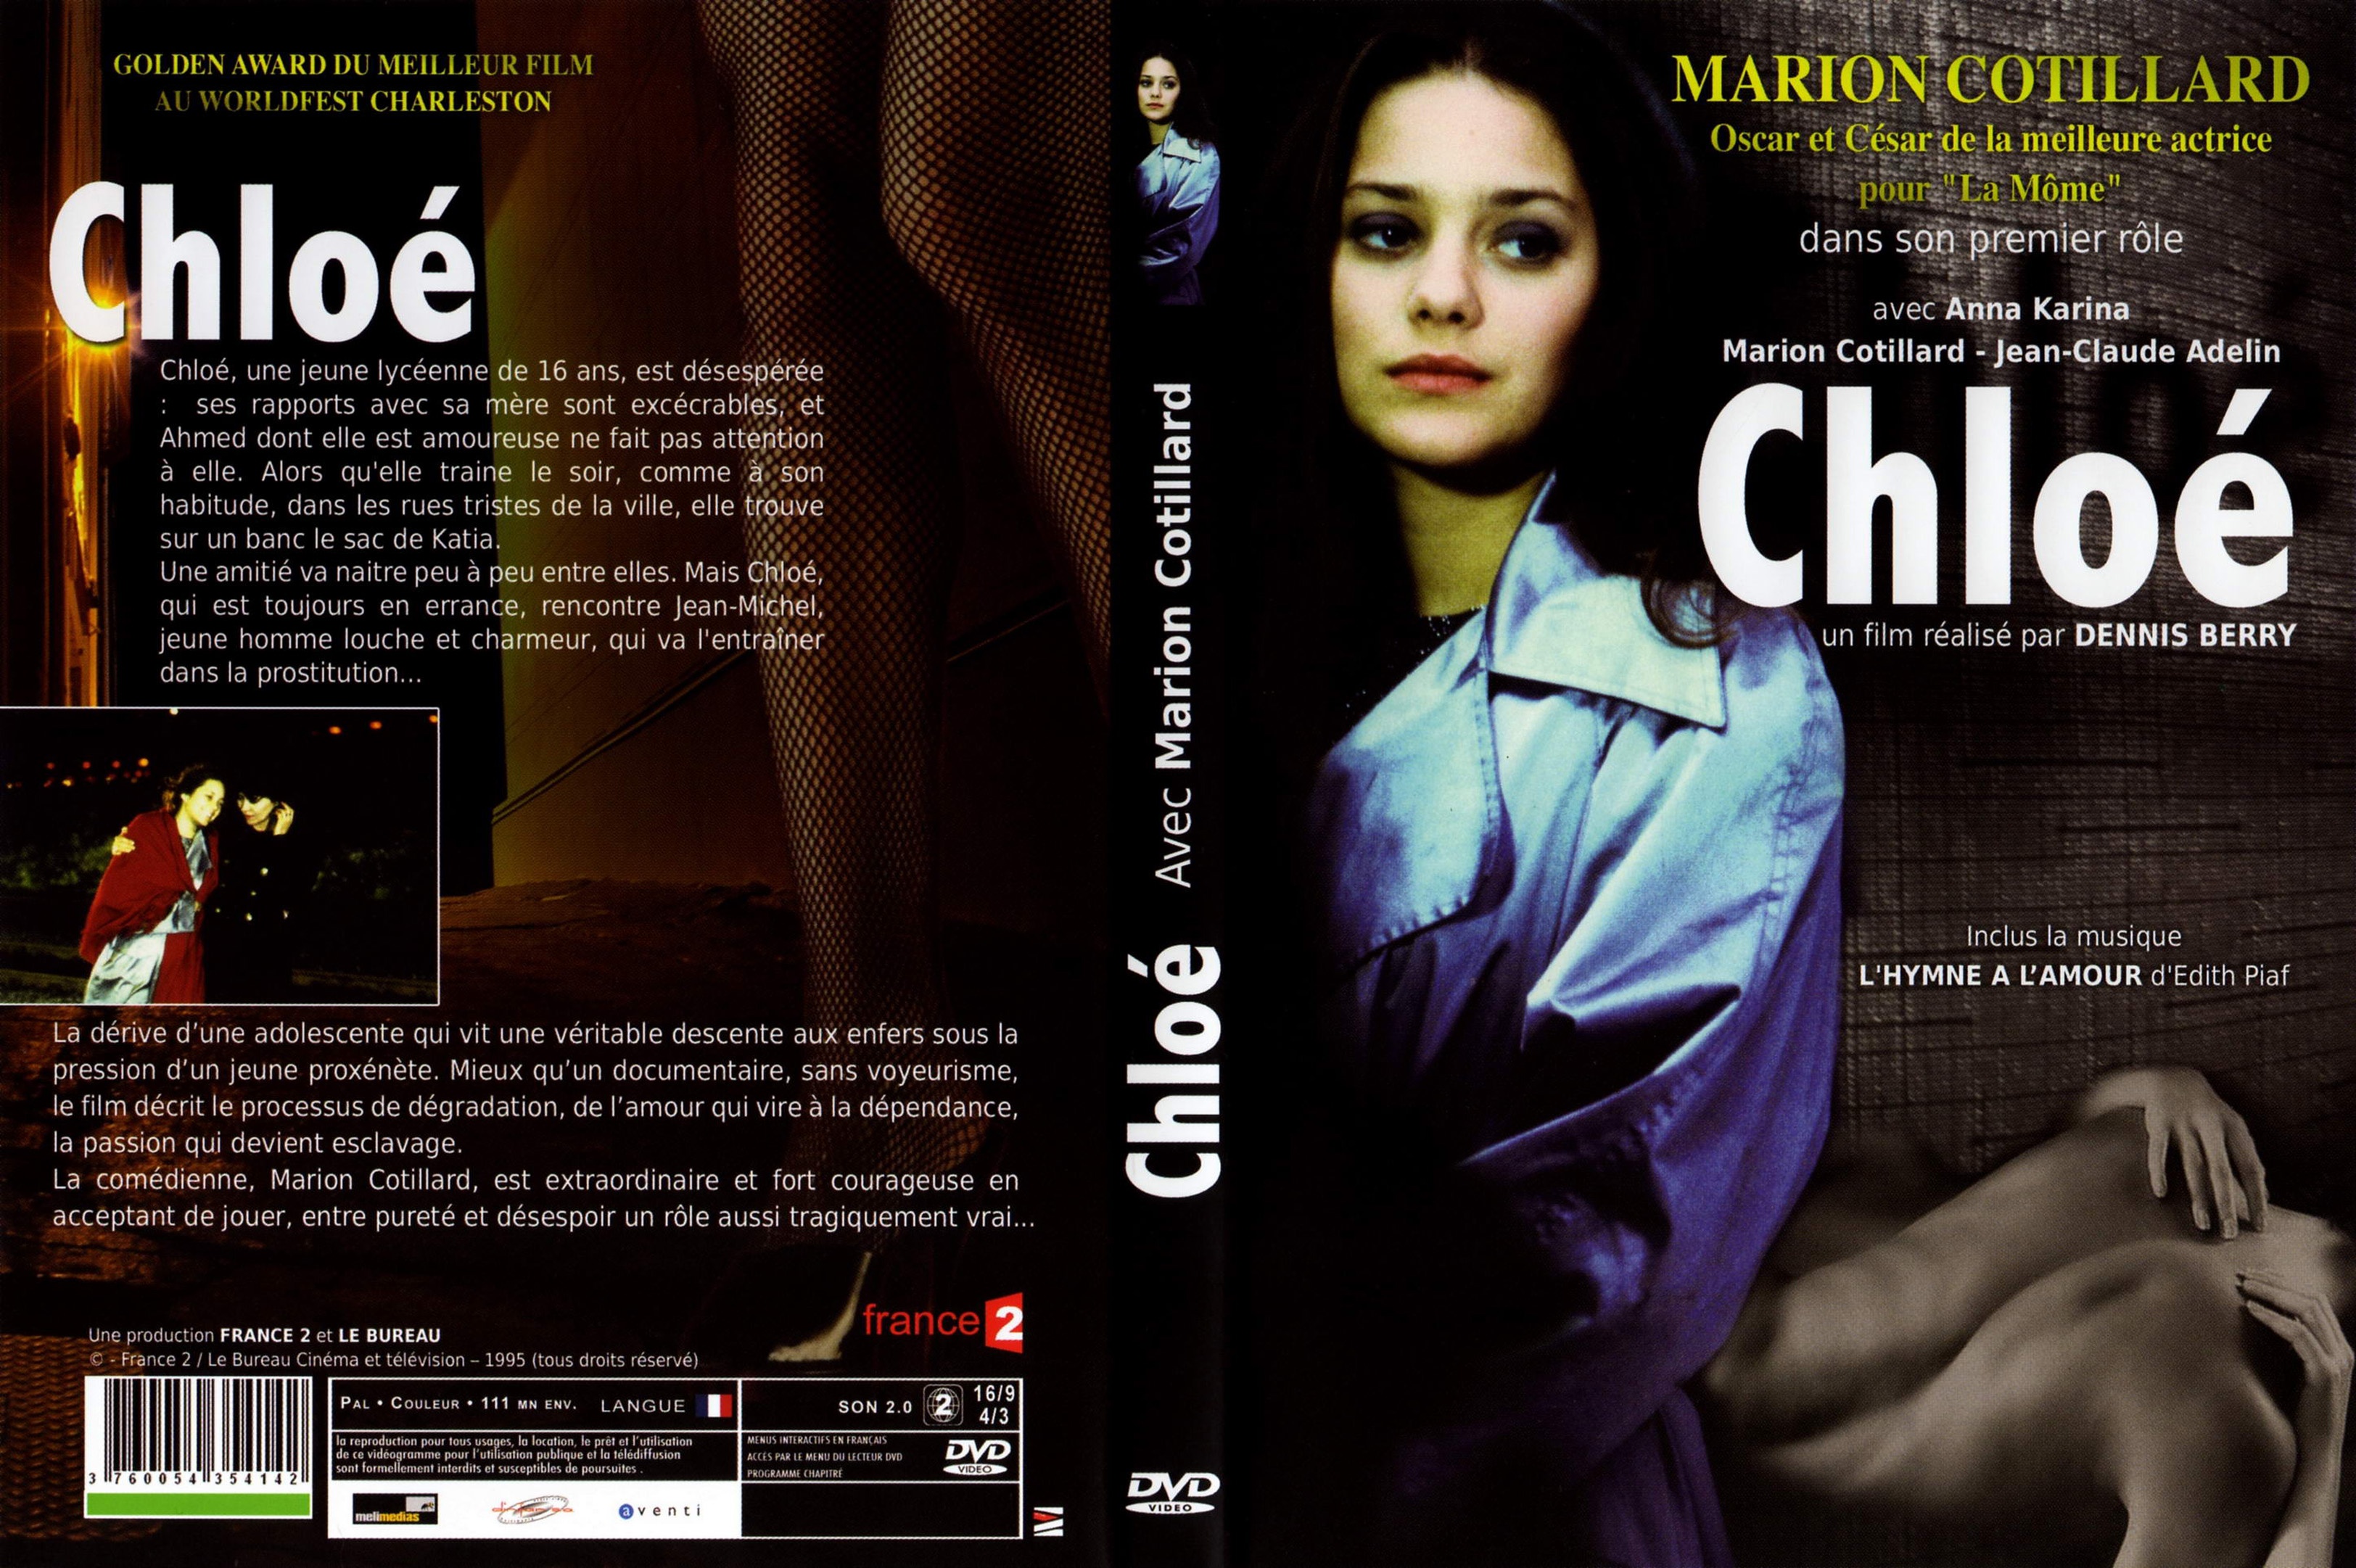 Jaquette DVD Chlo